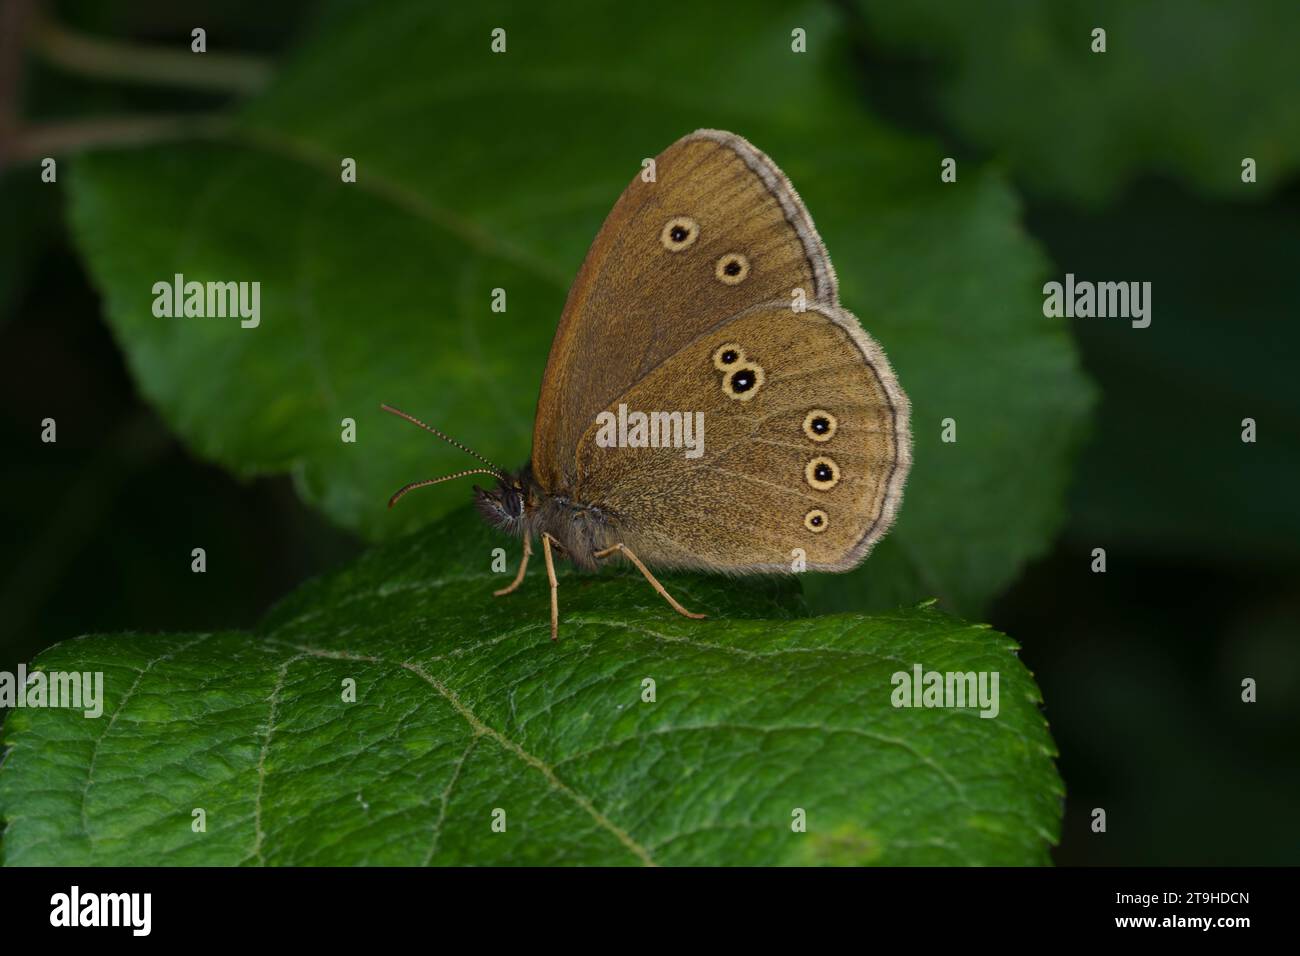 Aphantopus hyperanthus Family Nymphalidae Genus Aphantopus Ringlet butterfly wild nature insect wallpaper, picture, photography Stock Photo